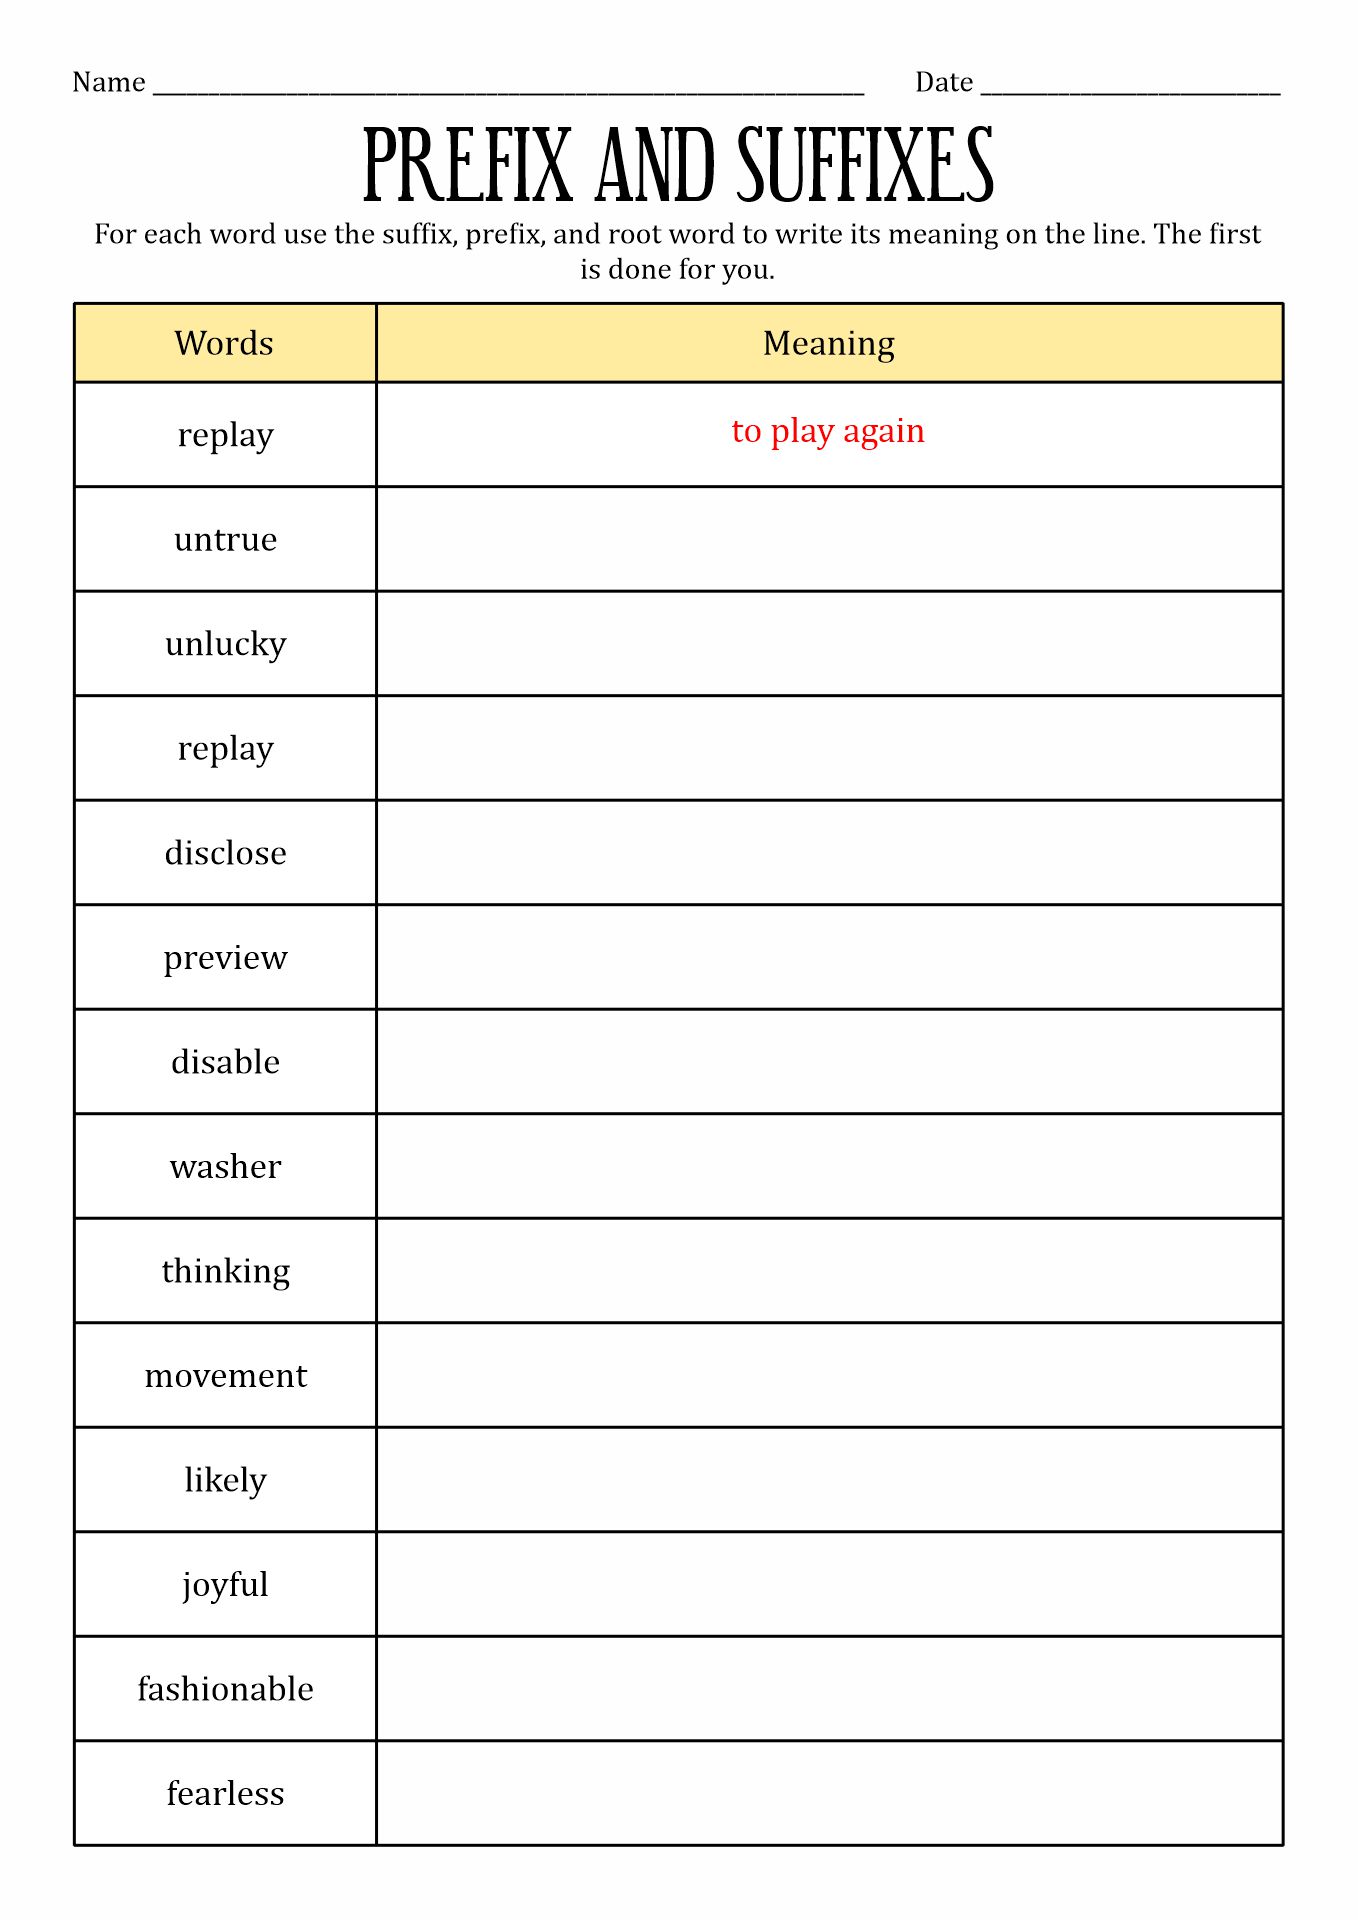 14-best-images-of-prefixes-suffixes-root-words-worksheets-latin